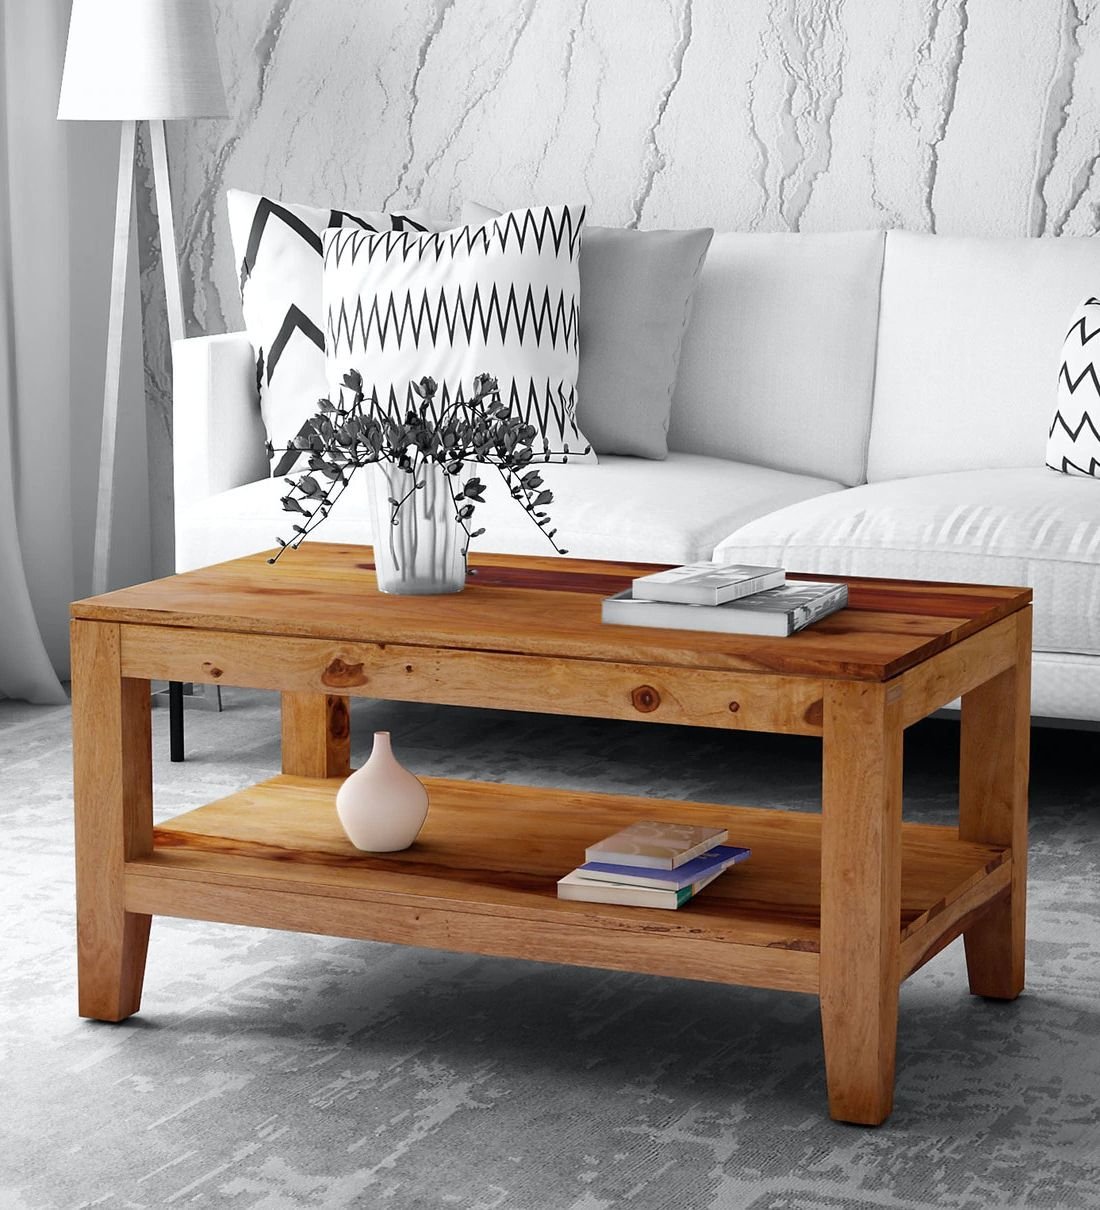 2019 Wood Coffee Tables With Buy Anitz Solid Wood Coffee Table In Warm Walnut Finish (View 4 of 20)